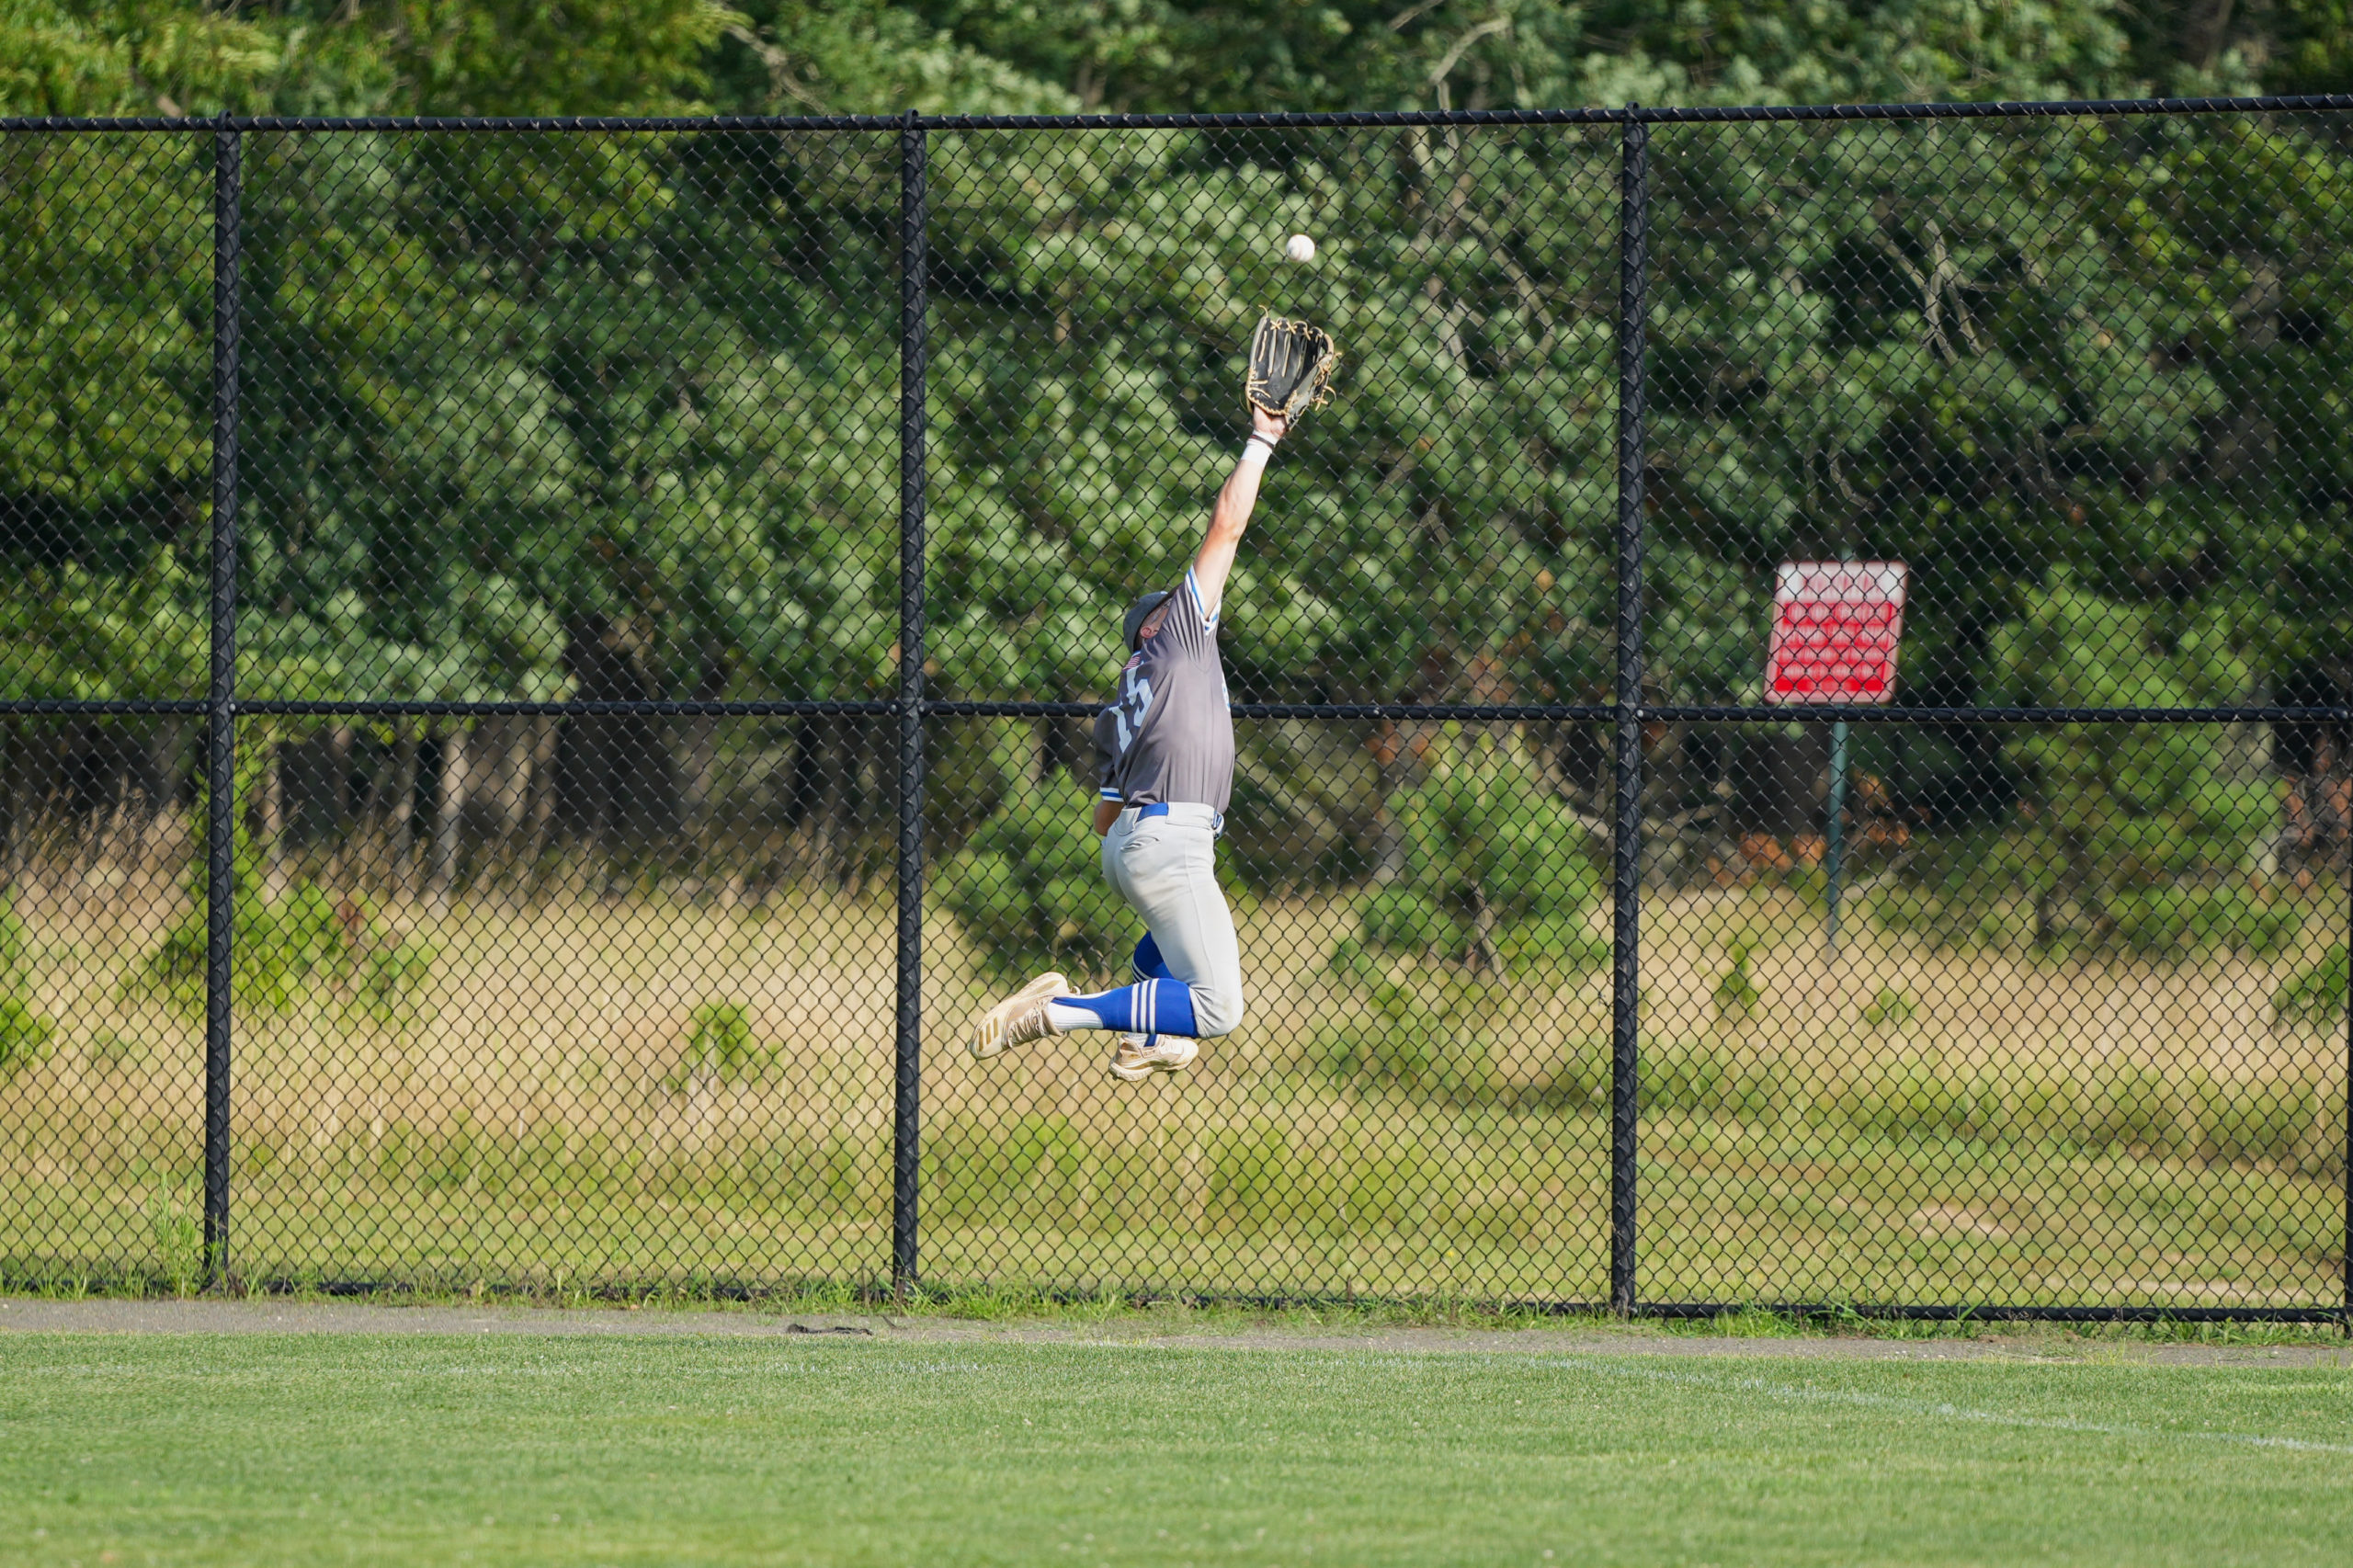 Southampton's Parker Stinson (Indiana State) makes an acrobatic play in right field.